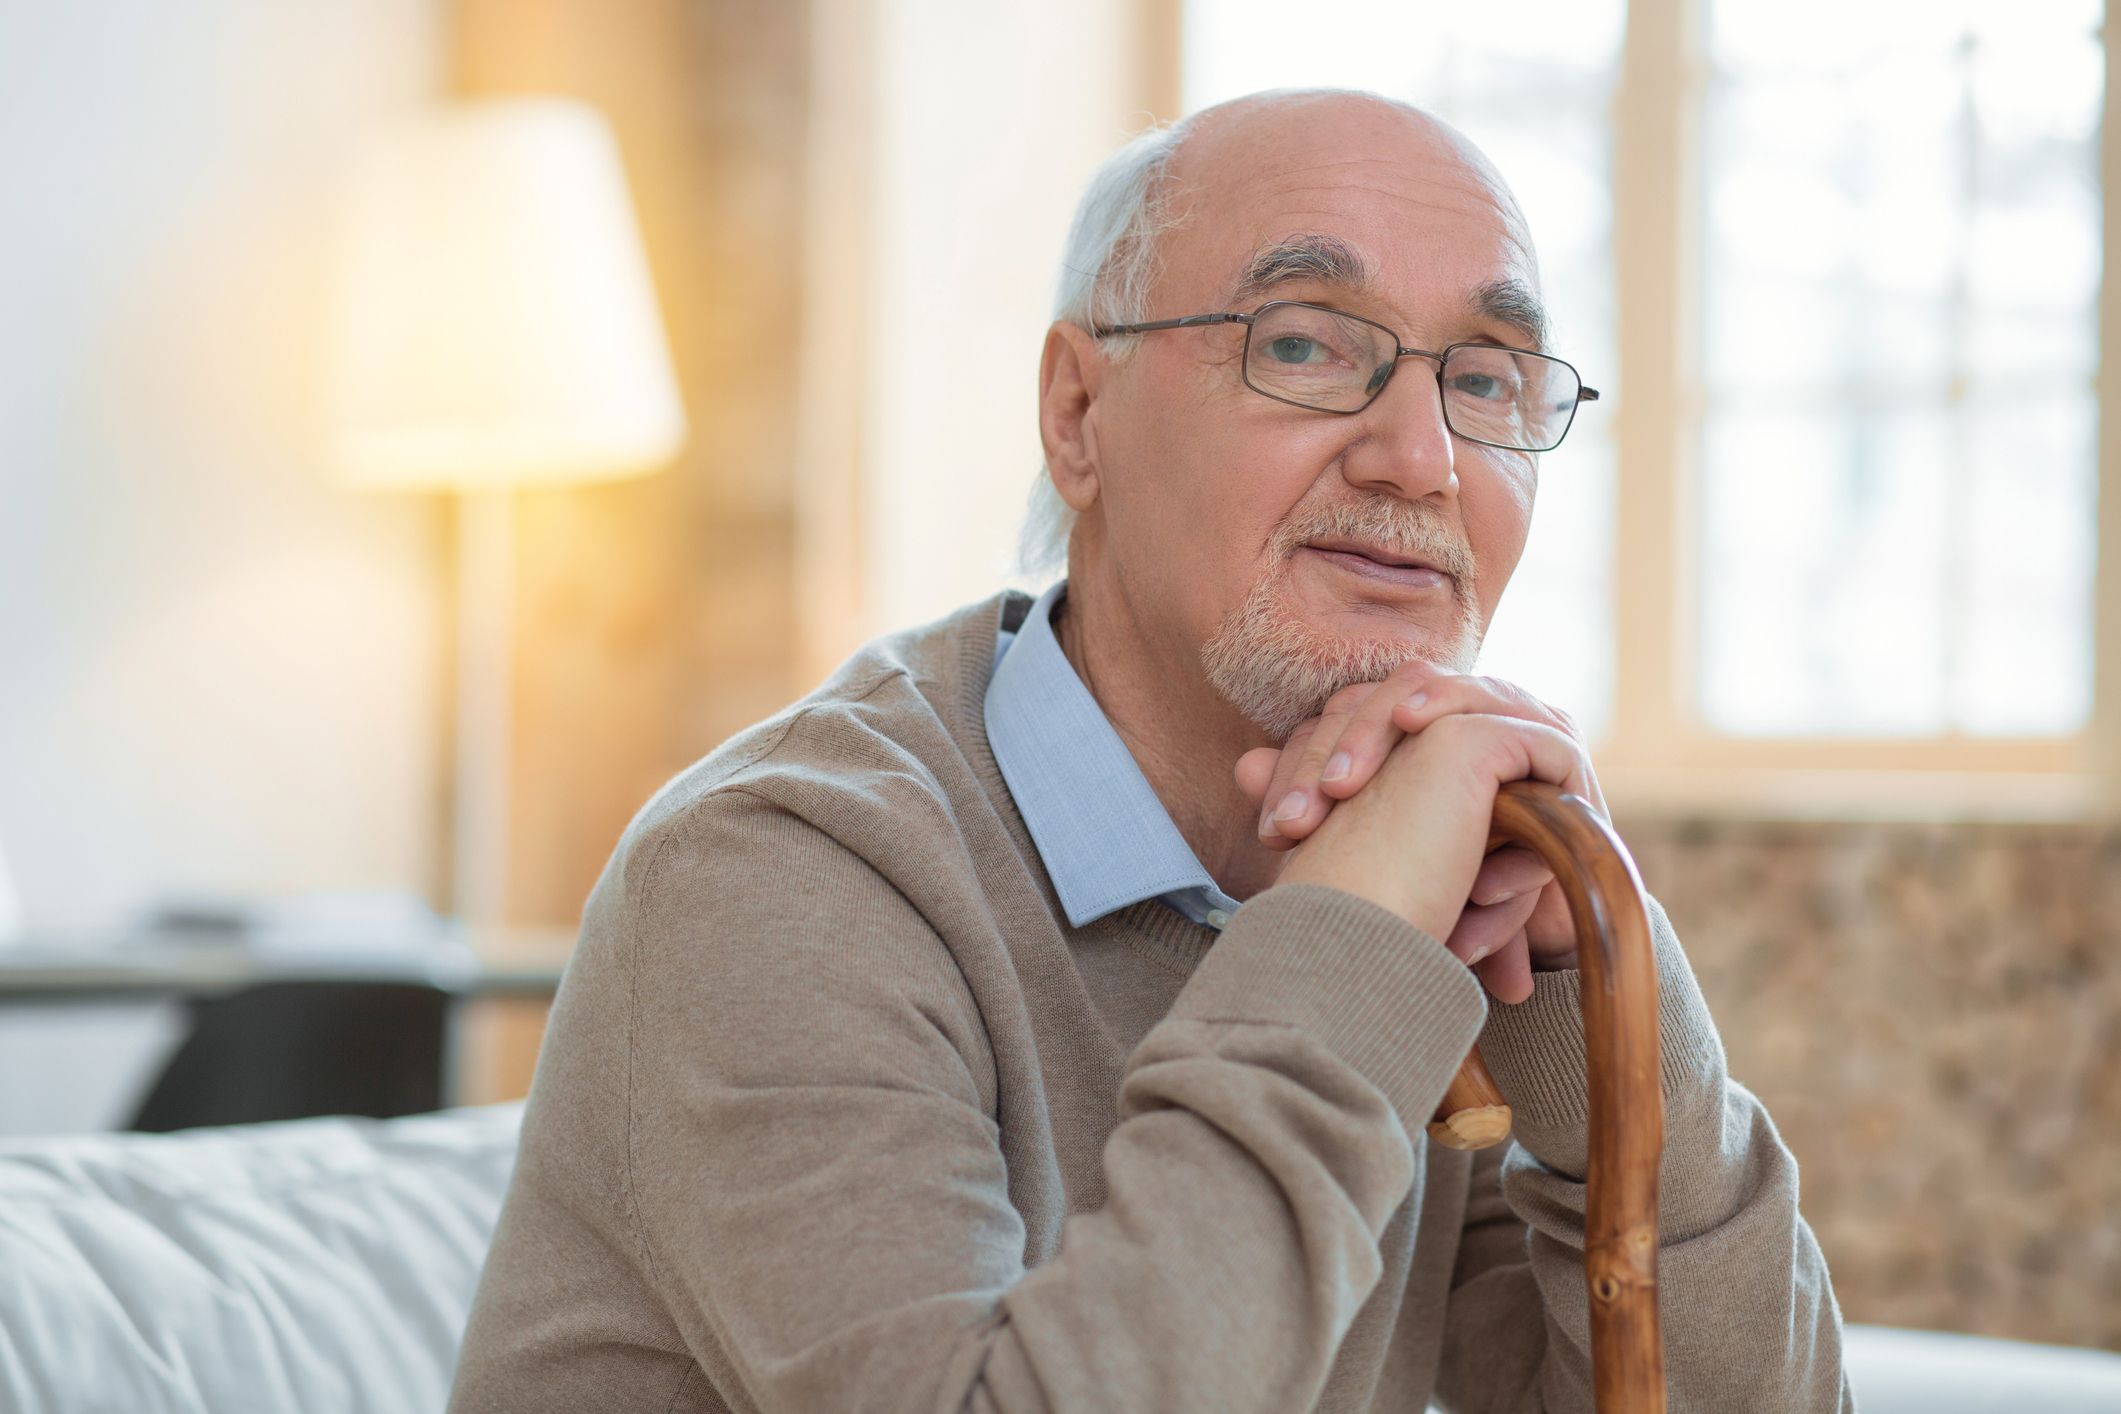 Meditative attractive senior man leaning on cane while wearing glasses and looking at camera